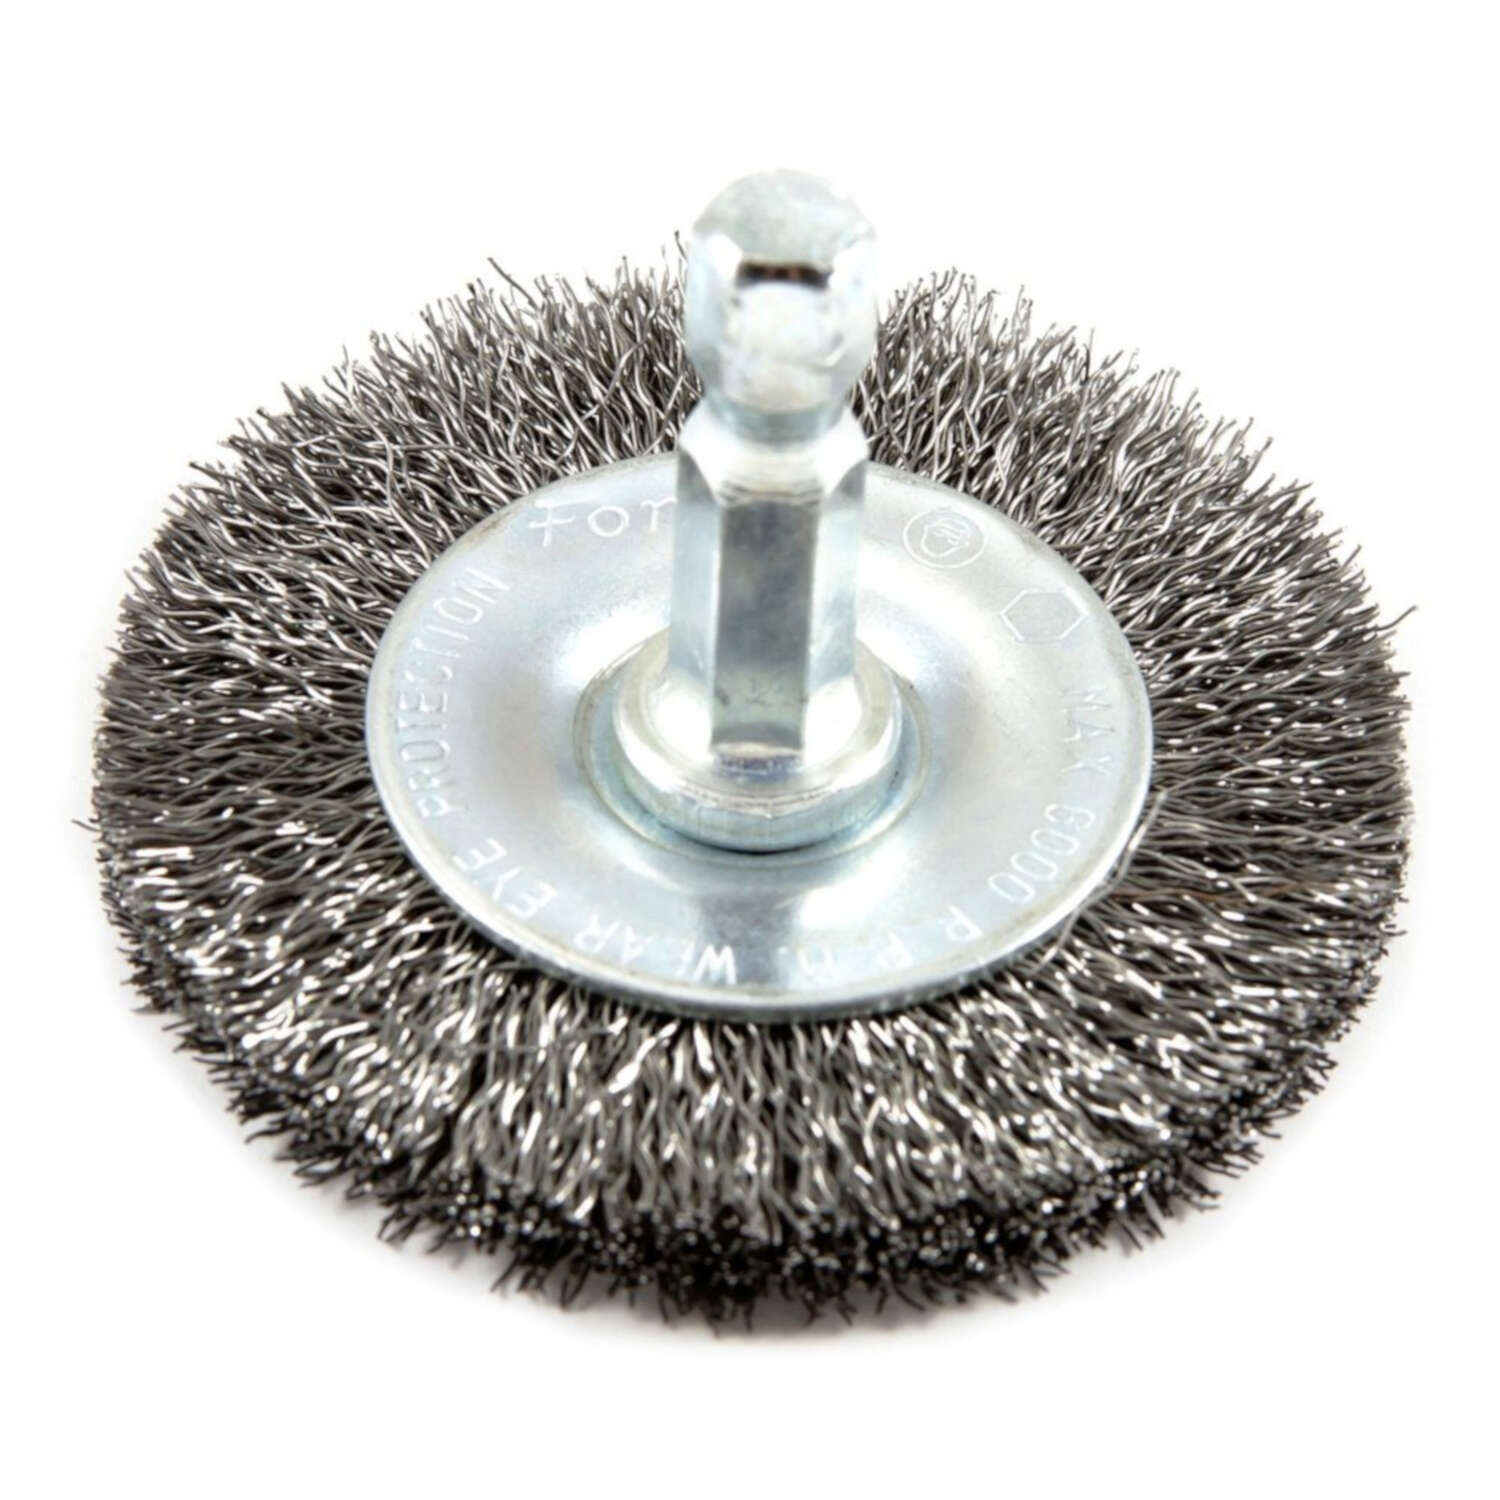 Forney 4 in Crimped Wire Wheel Brush Metal 6000 rpm 1 pc. 